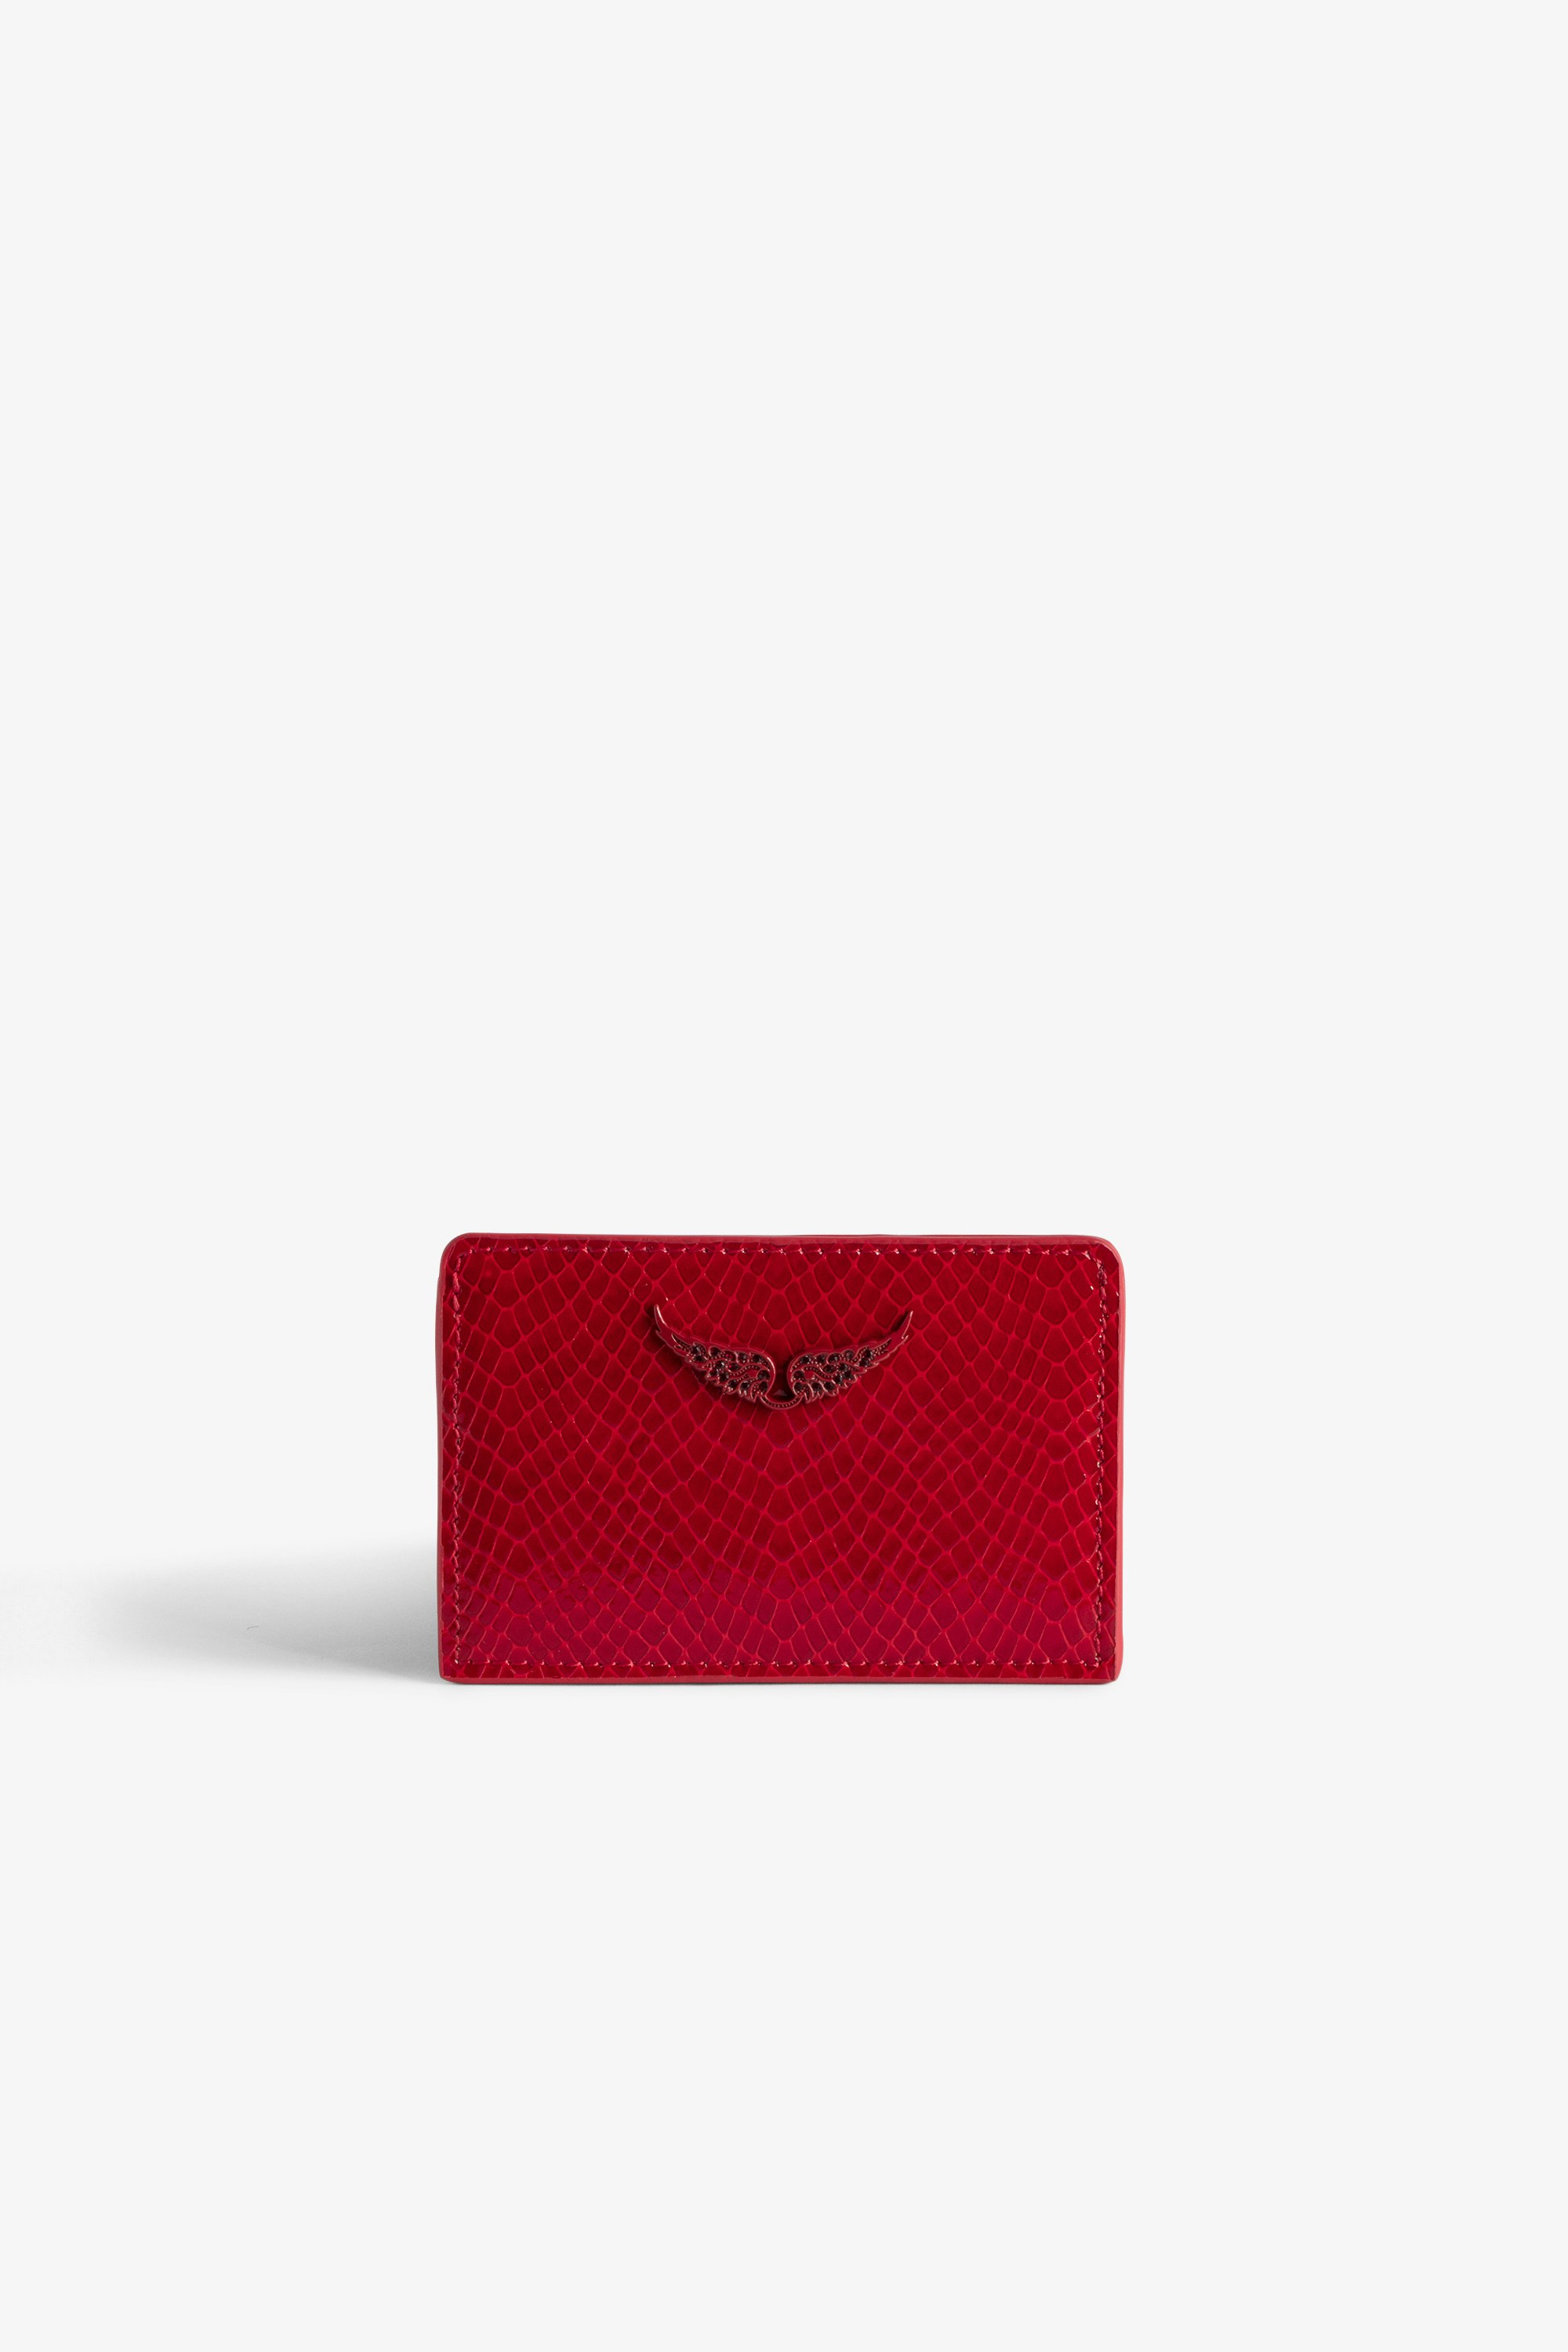 ZV Pass Glossy Wild Embossed Card Holder - Women’s red python-effect patent leather card holder with diamanté wings charm.